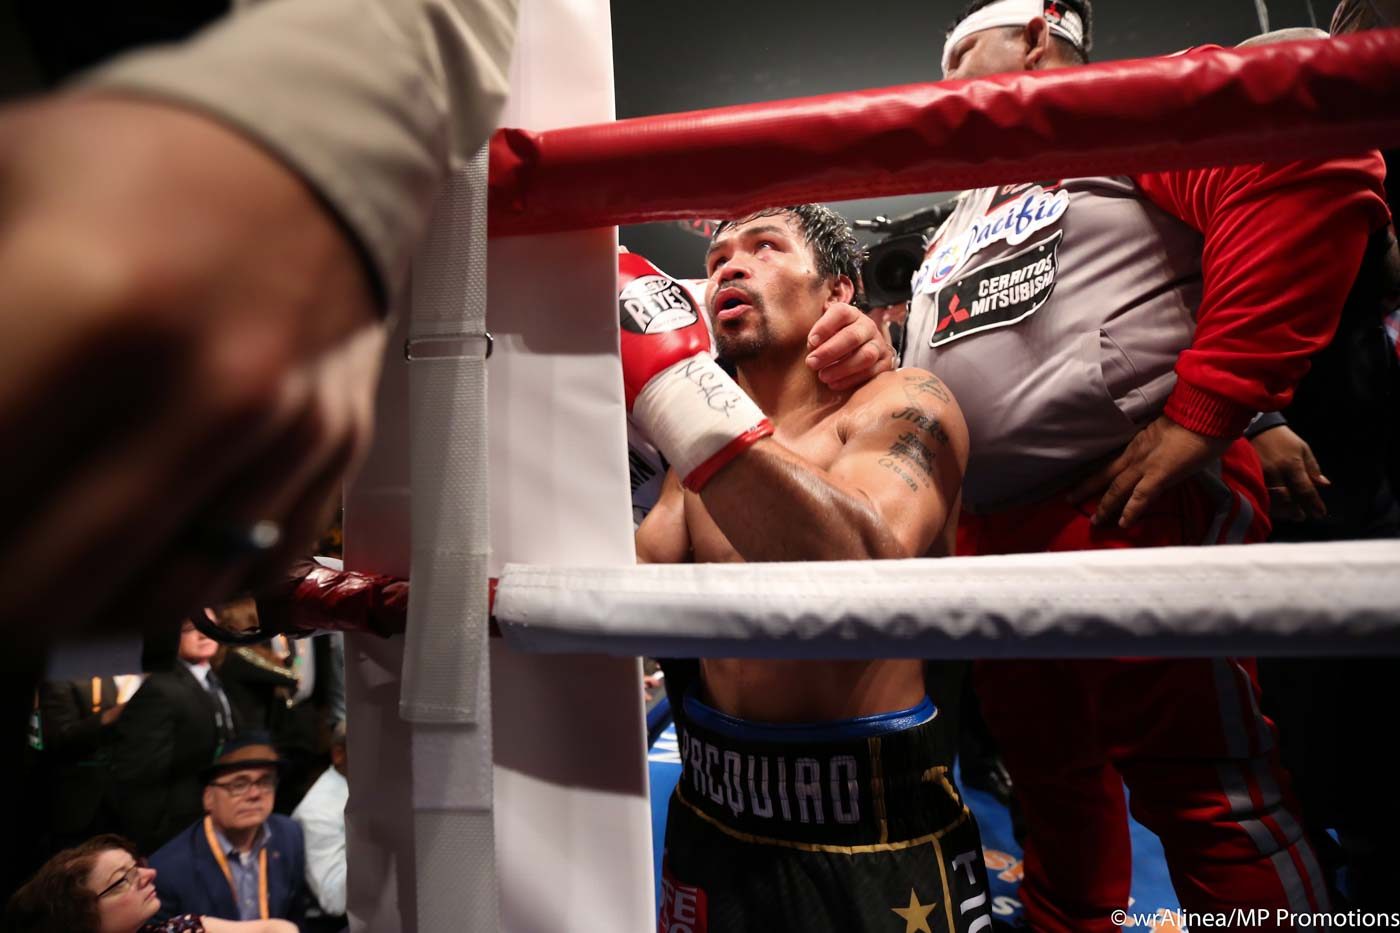 Investigation into burglary continues as Pacquiao stays in another house